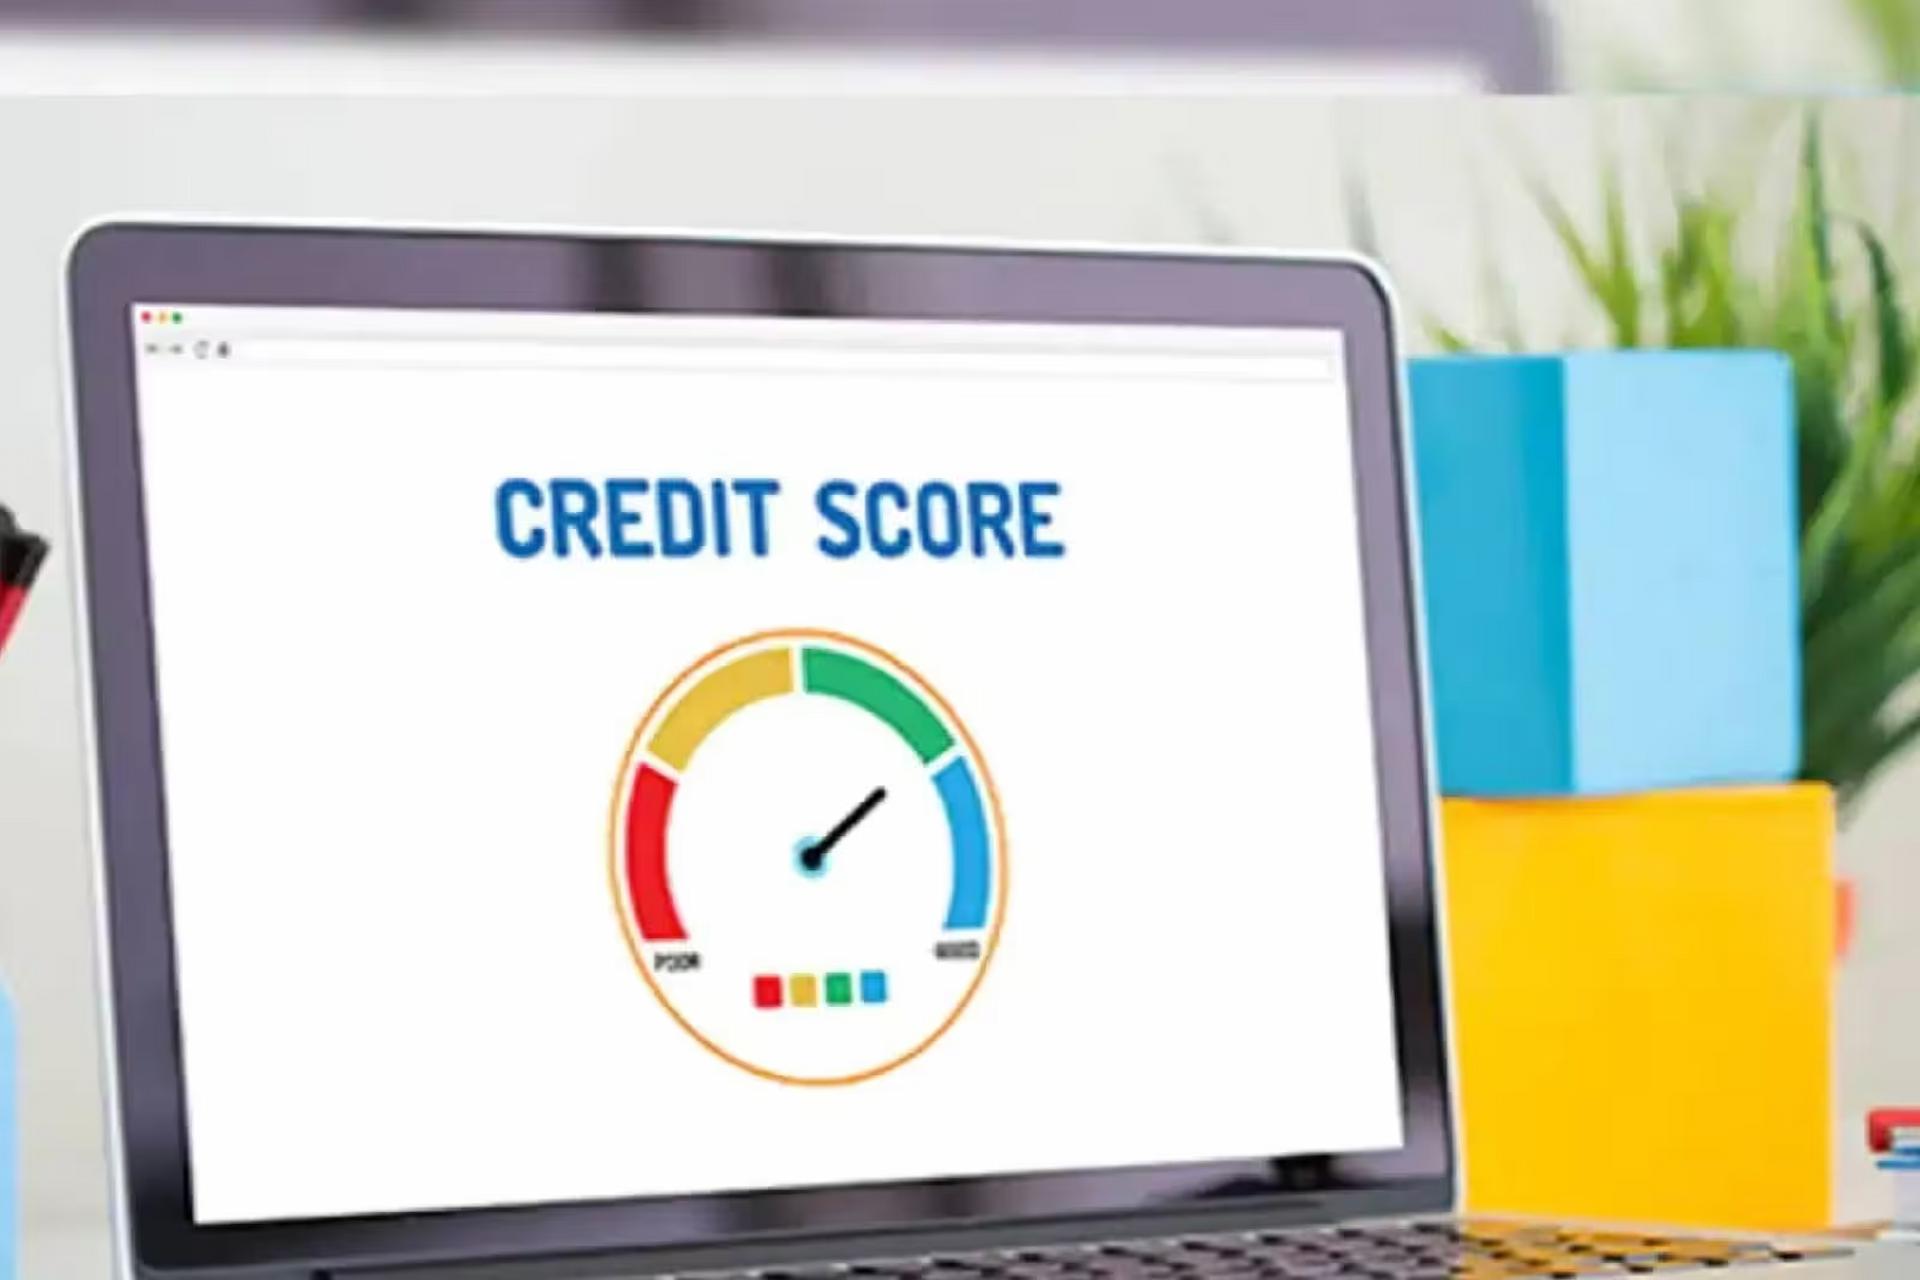 How To Improve Your Credit Score And Get Better Loan Offers?